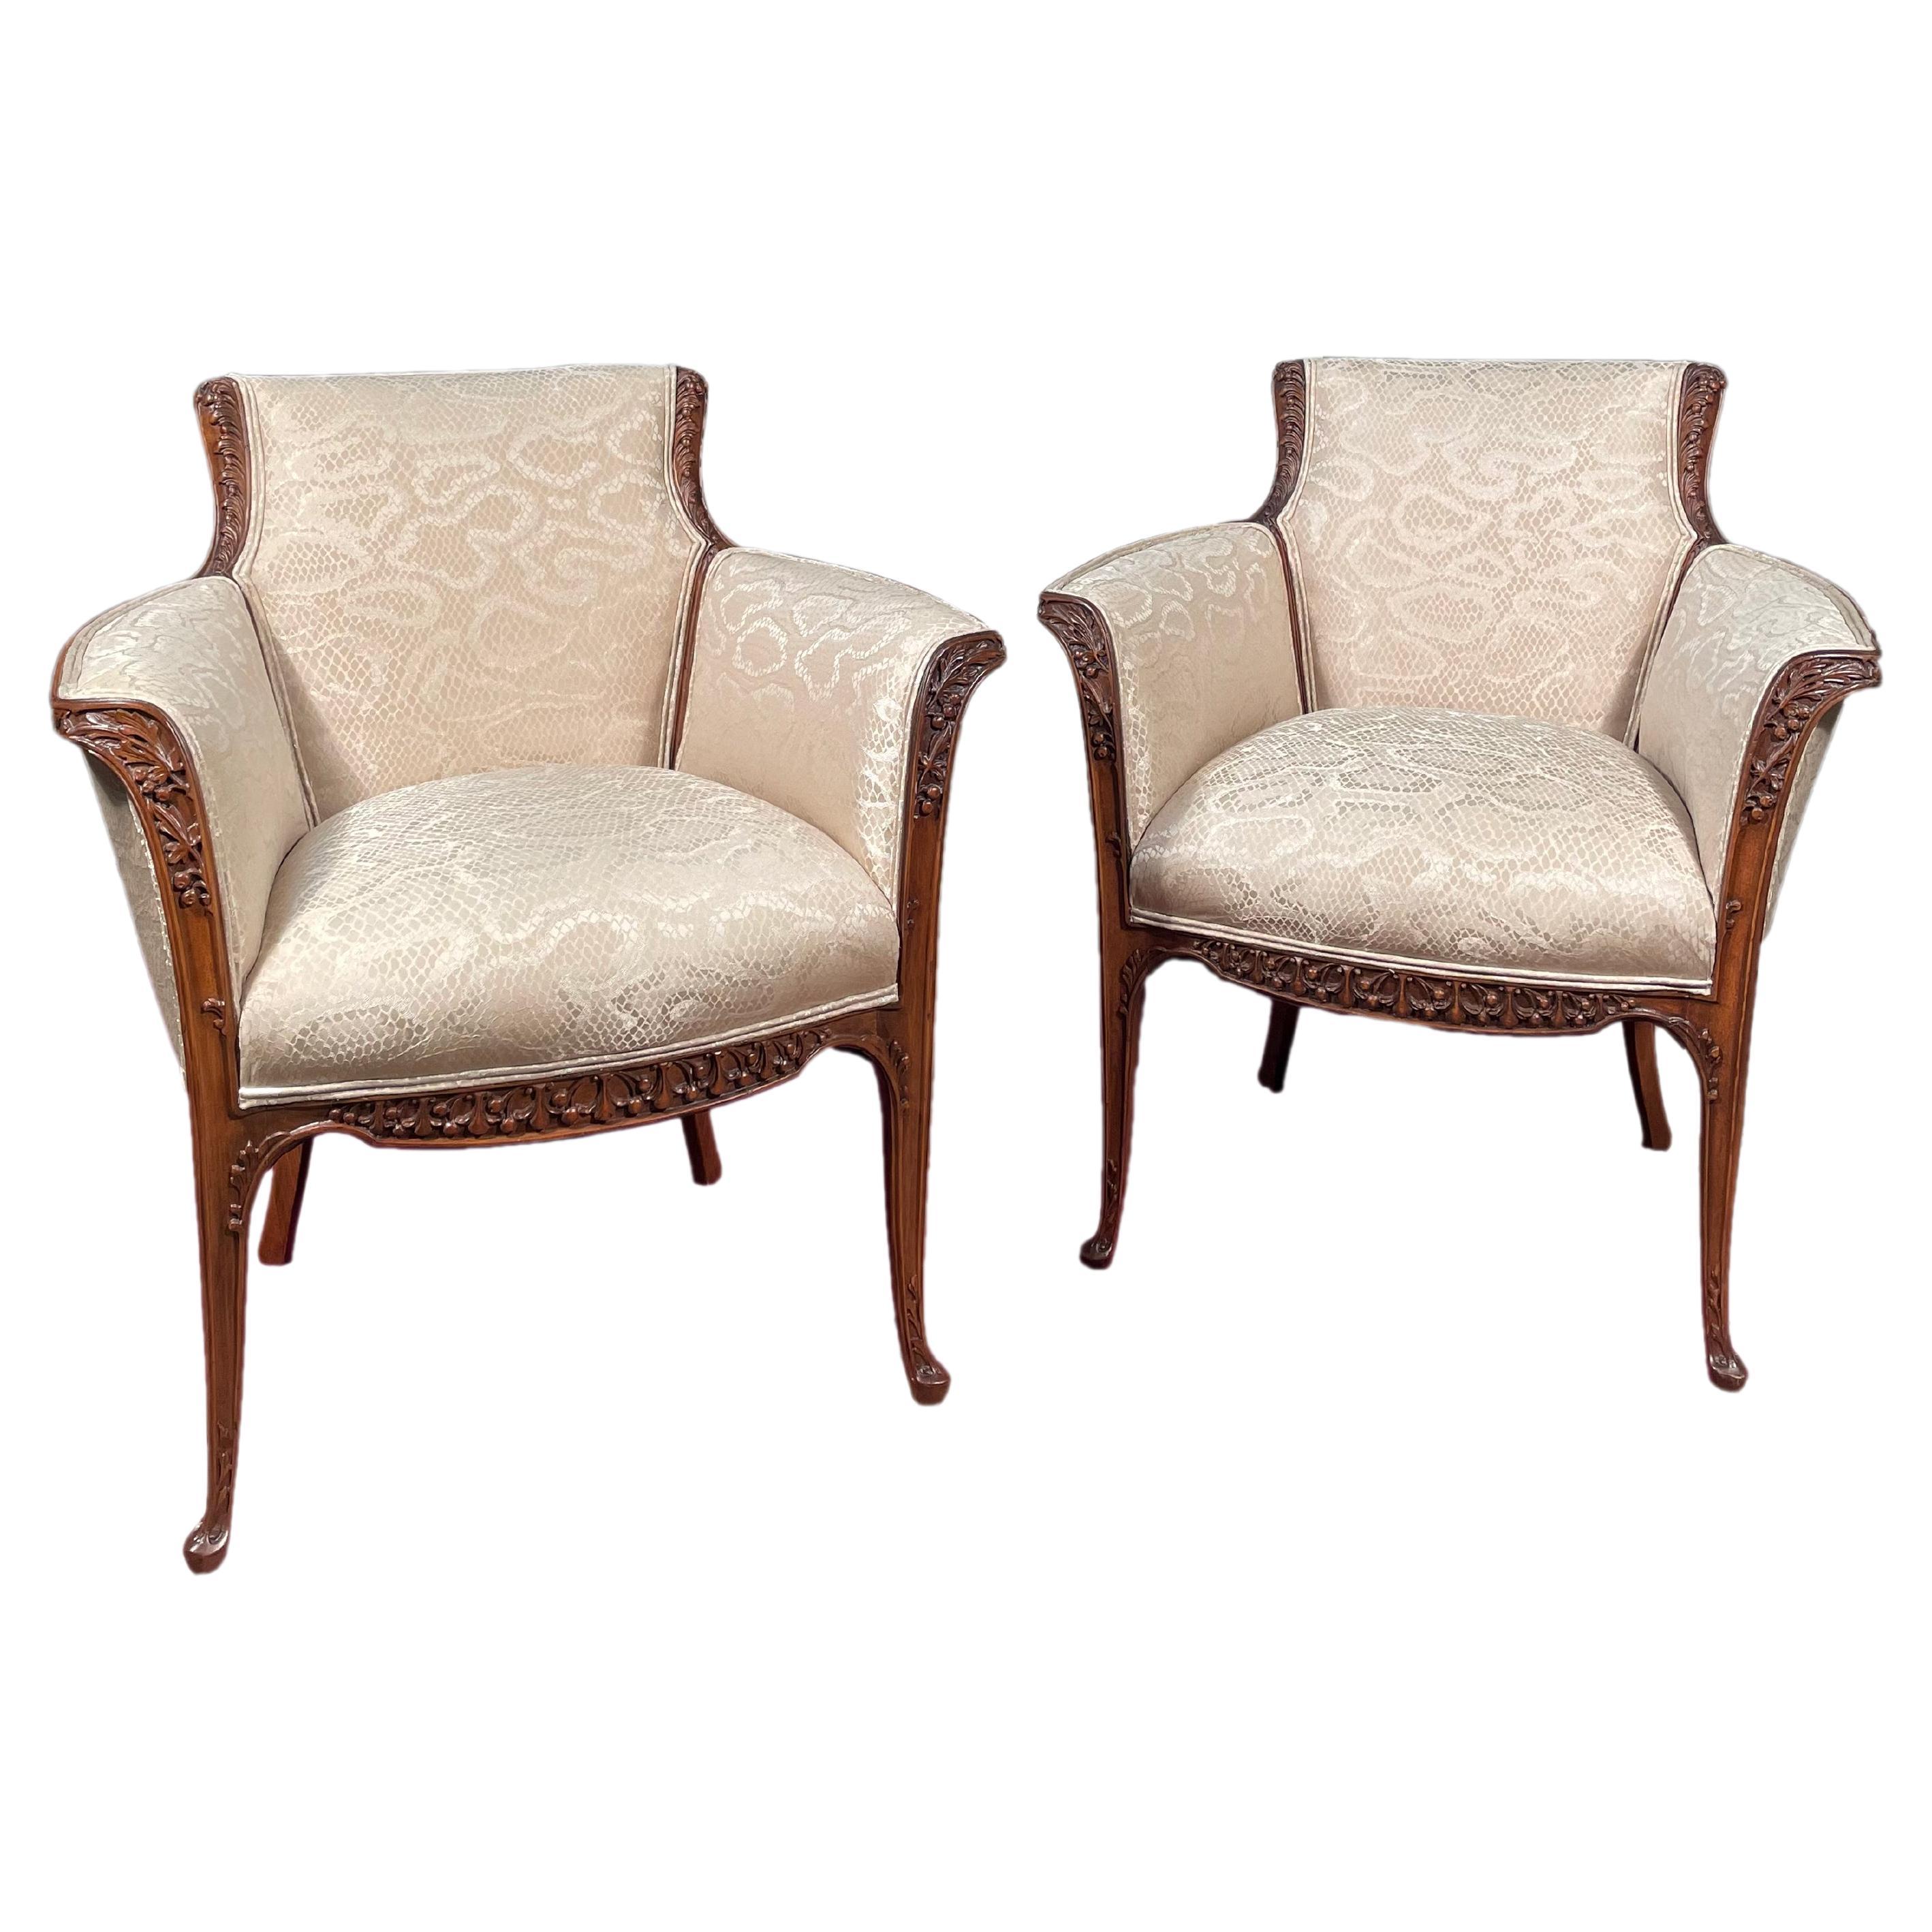 Pair of French Art Nouveau Armchairs by, Louis Majorelle Arm Chairs  For Sale